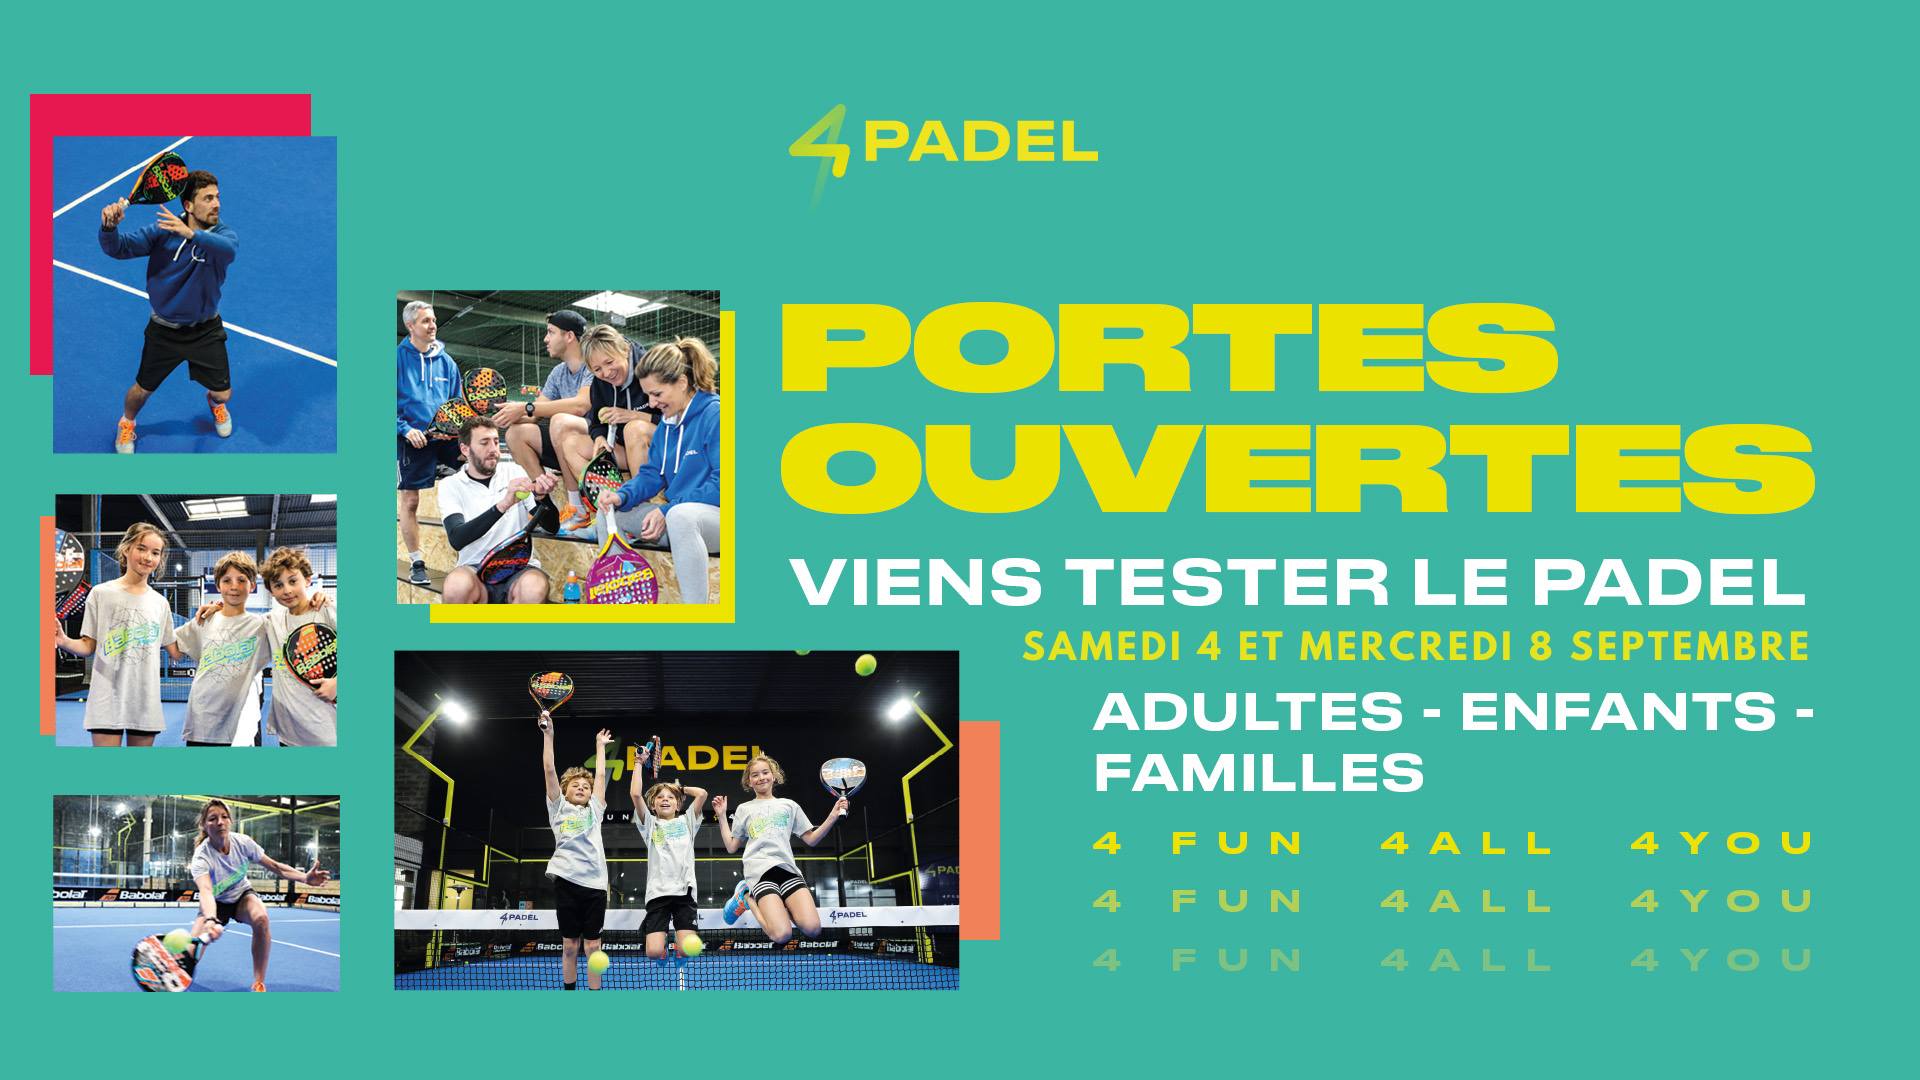 Open Days at 4Padel from Colomiers-Toulouse